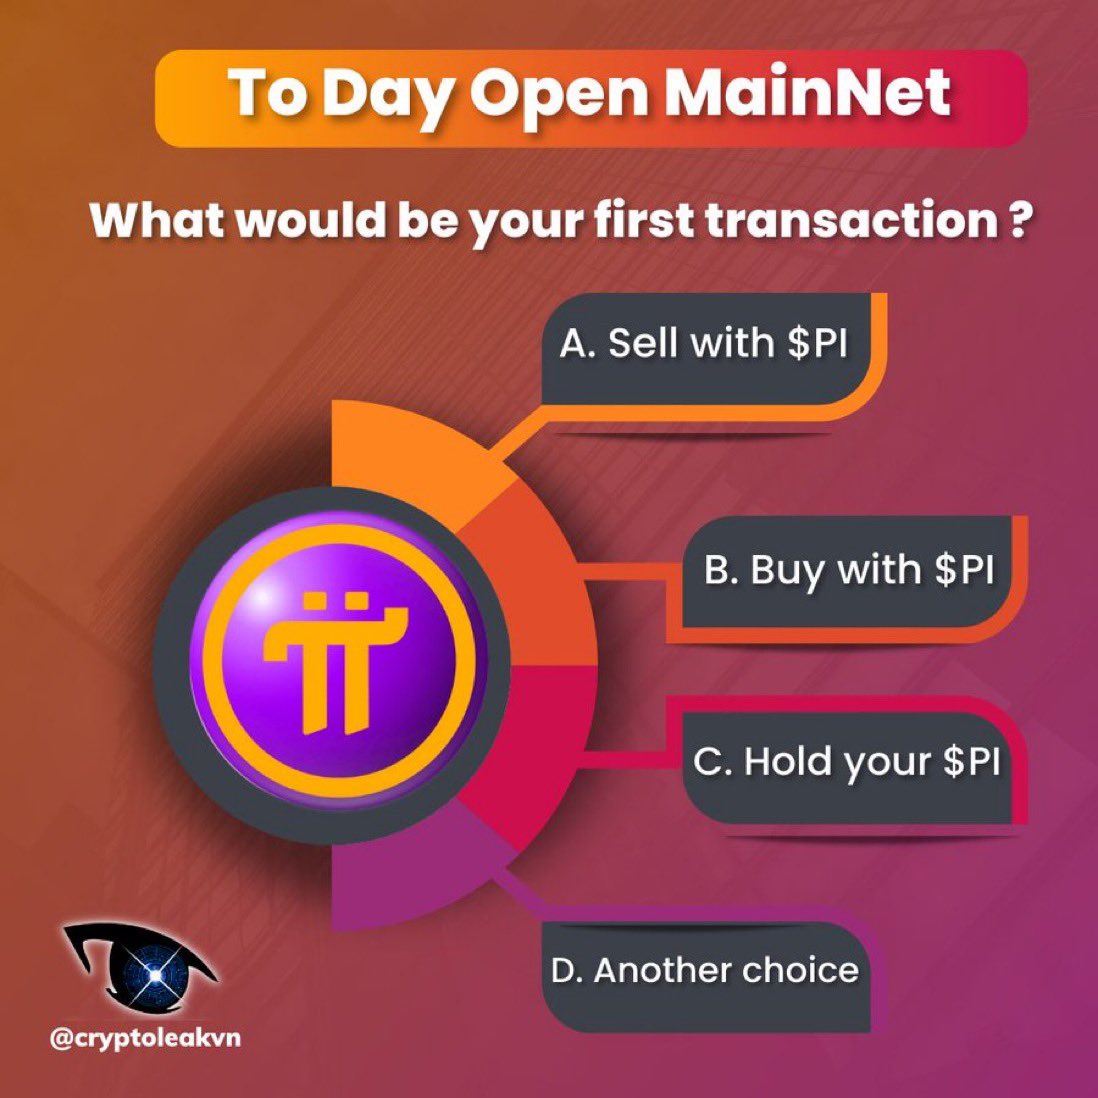 If #PiNetwork goes live today on Open MainNet, what would be your first transaction? A. Sell with $PI B. Buy with $PI C. Hold your $PI D. Another choice Share your thoughts. #PiNetwork #PiKYC #Pioneers #Picoins #Picommunity #Pimining #PiCoreTeam #pi #pinetwork